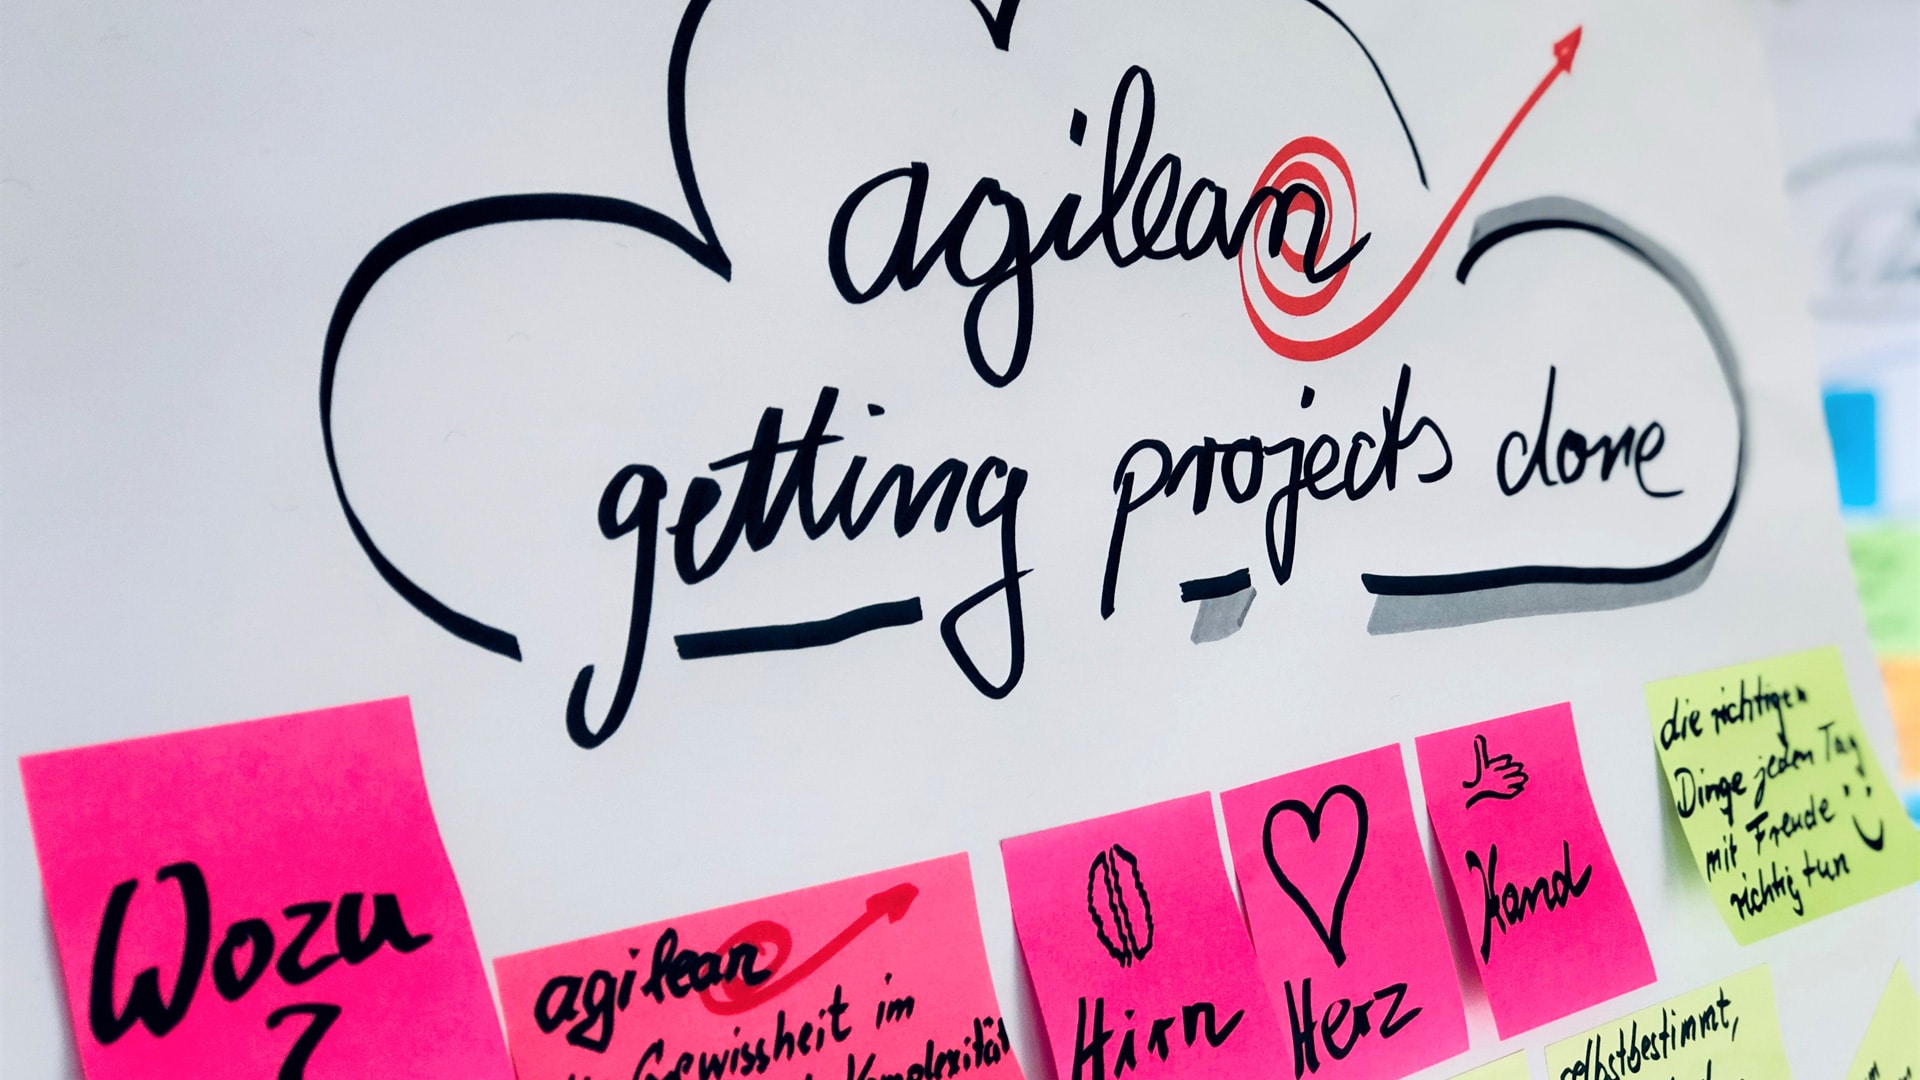 Getting Projects Done - agilean